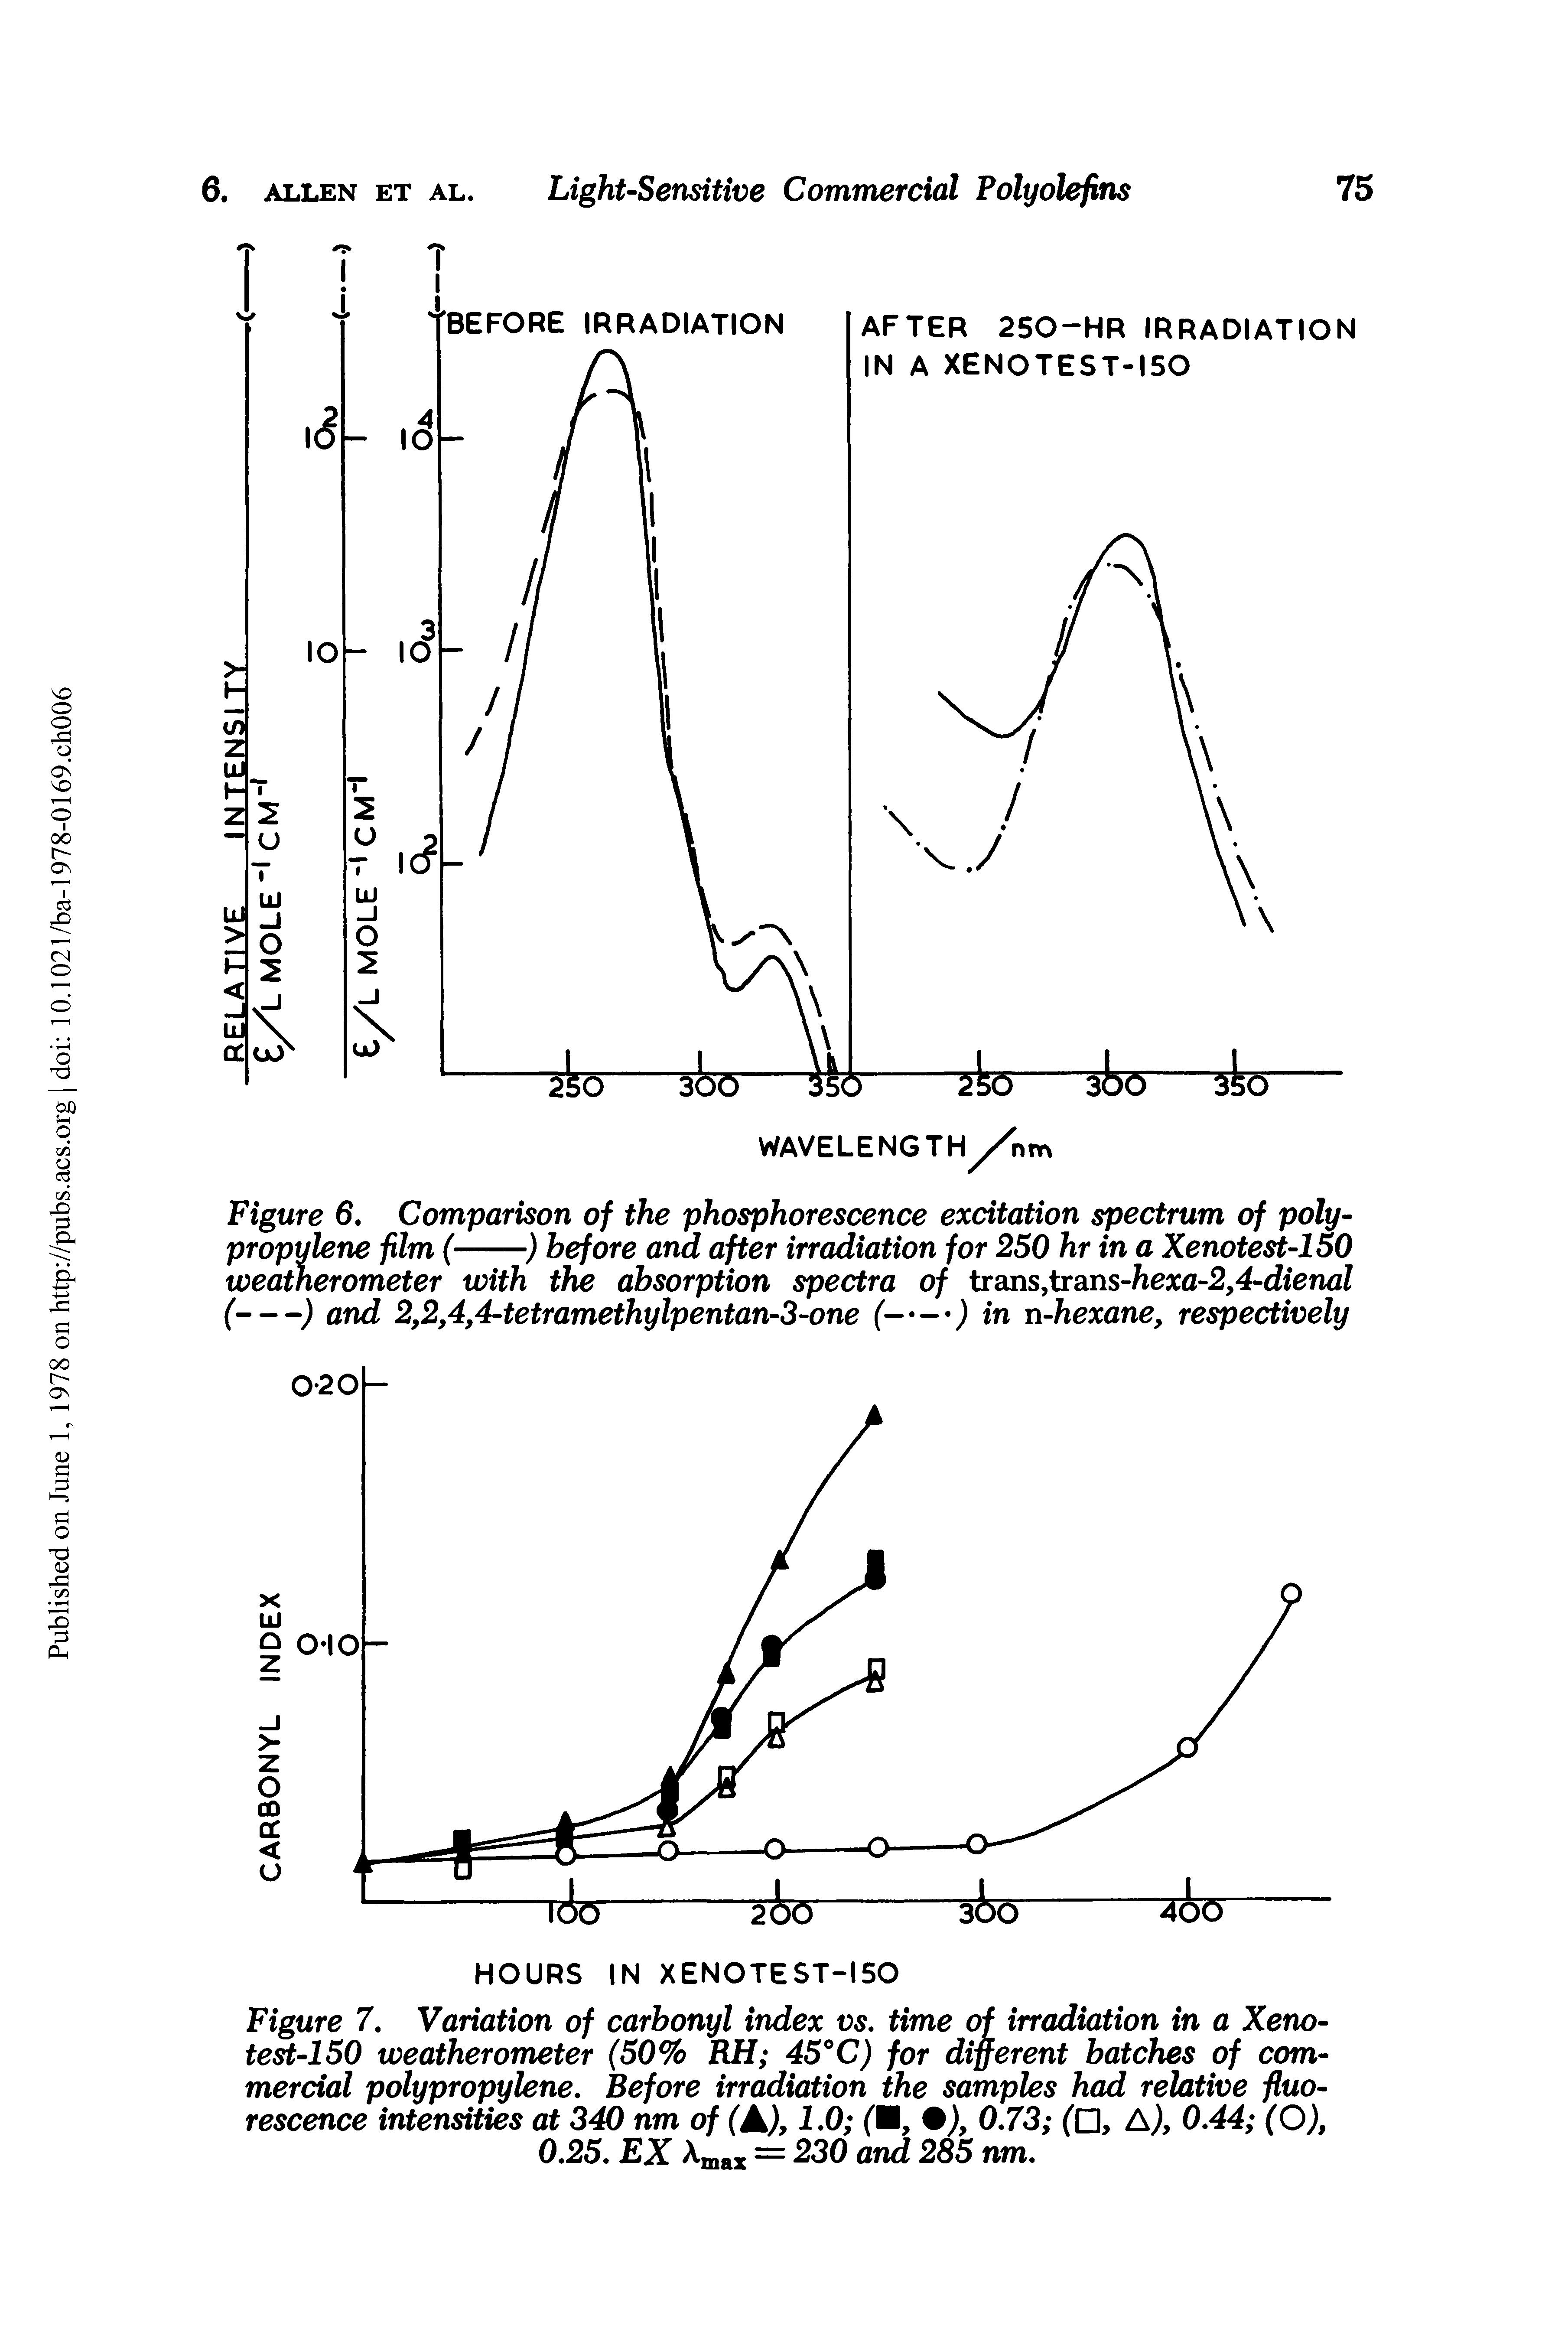 Figure 6. Comparison of the phosphorescence excitation spectrum of polypropylene film (--) before and after irradiation for 250 hr in a Xenotest-150...